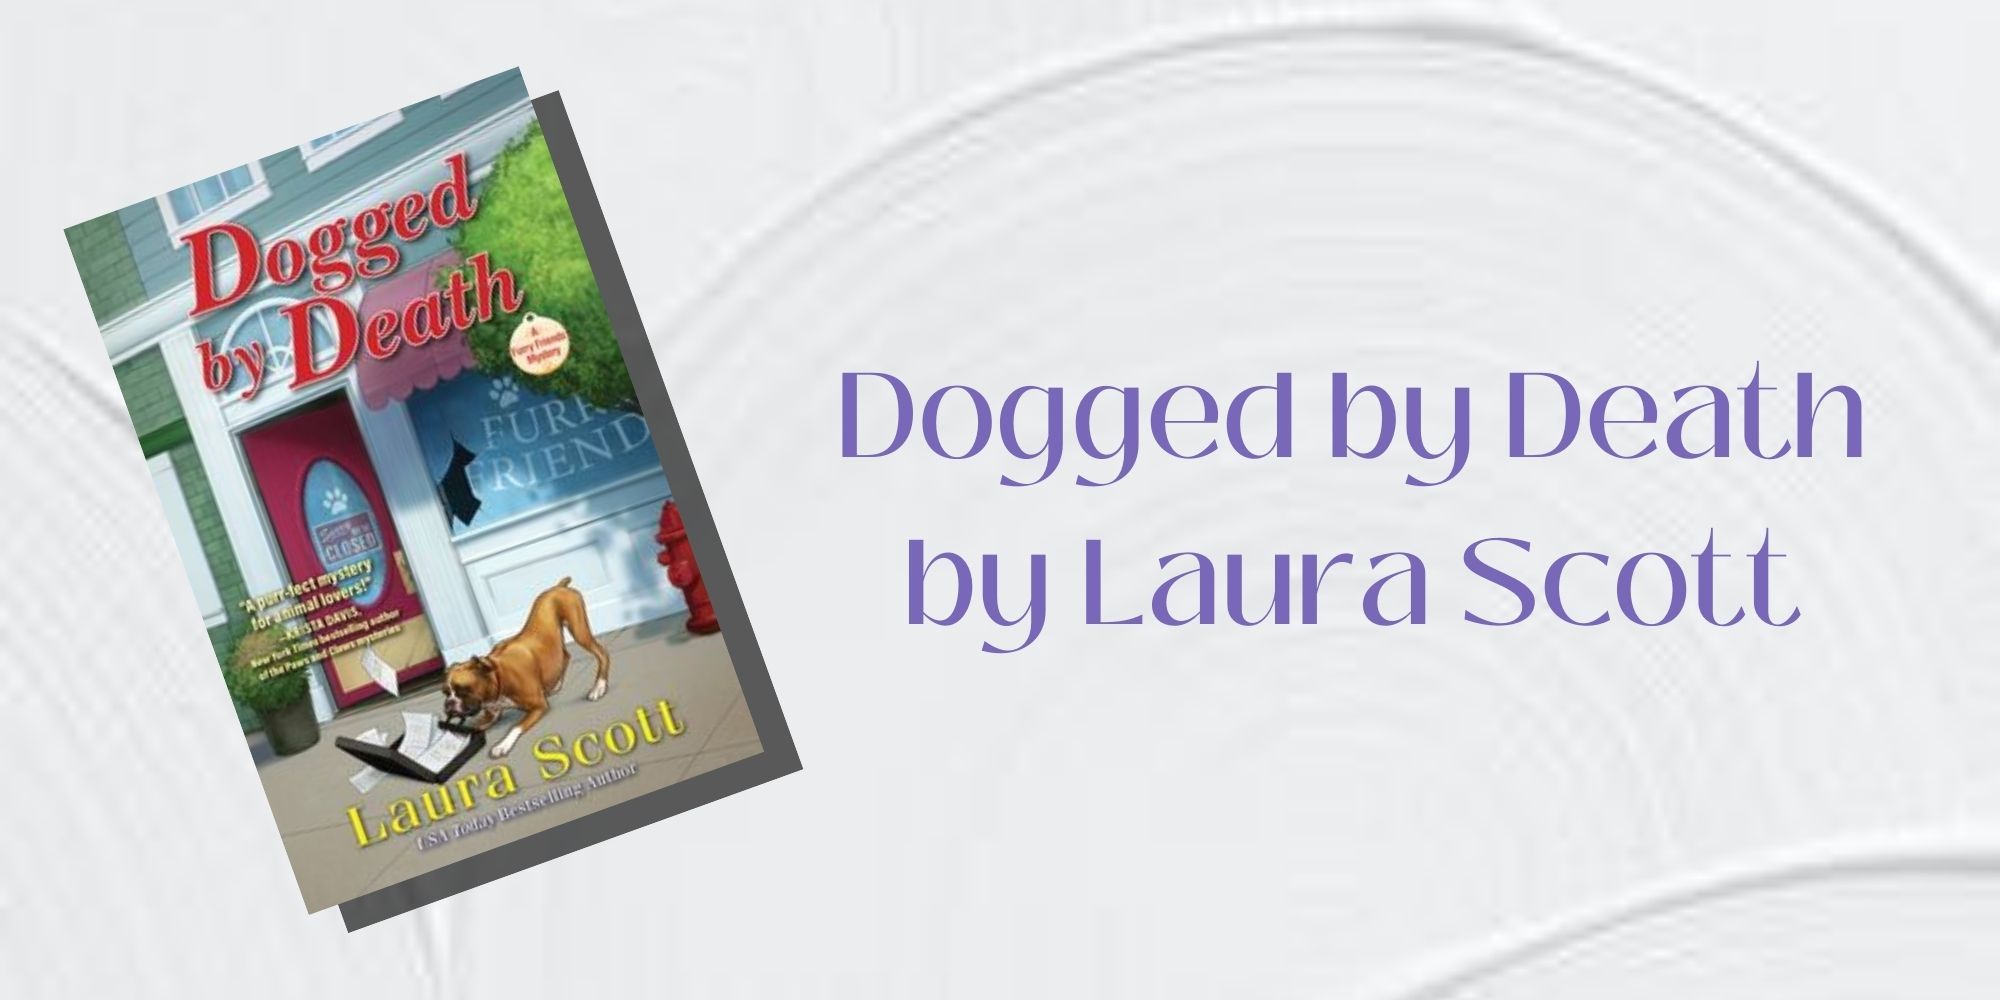 The cover of Dogged by Death by Laura Scott